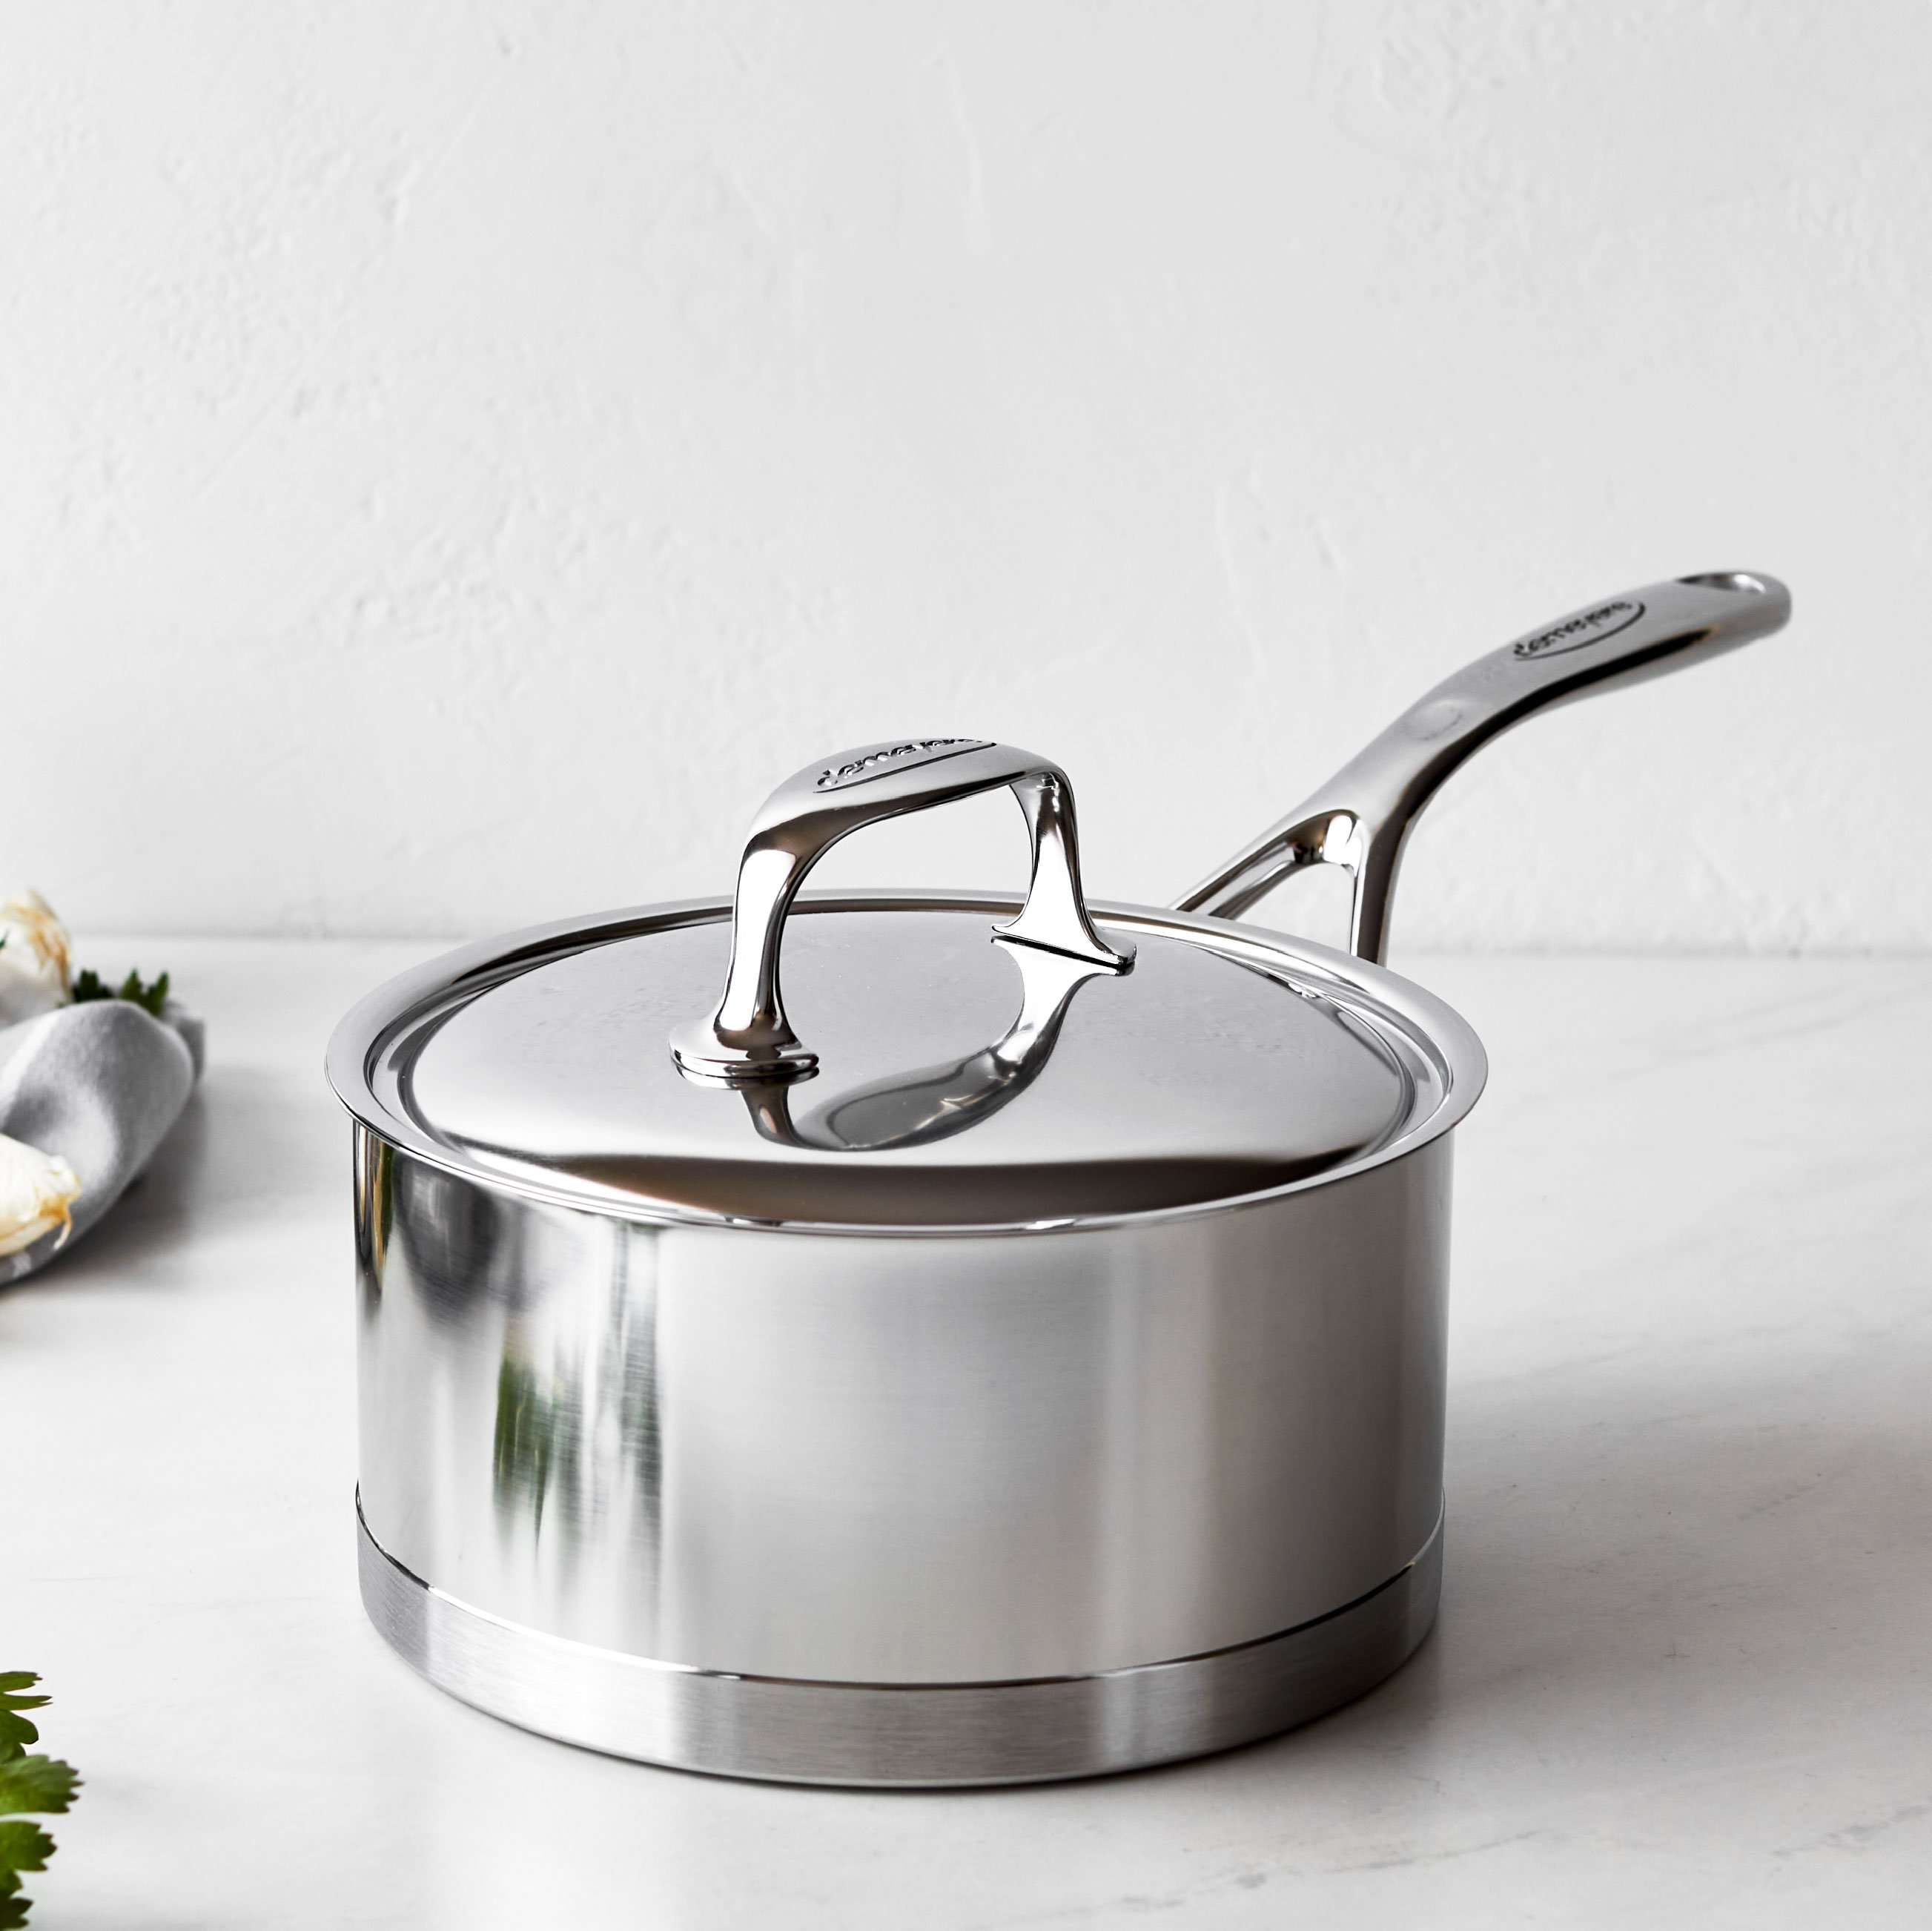 8.5 qt Stock pot with lid, 18/10 Stainless Steel